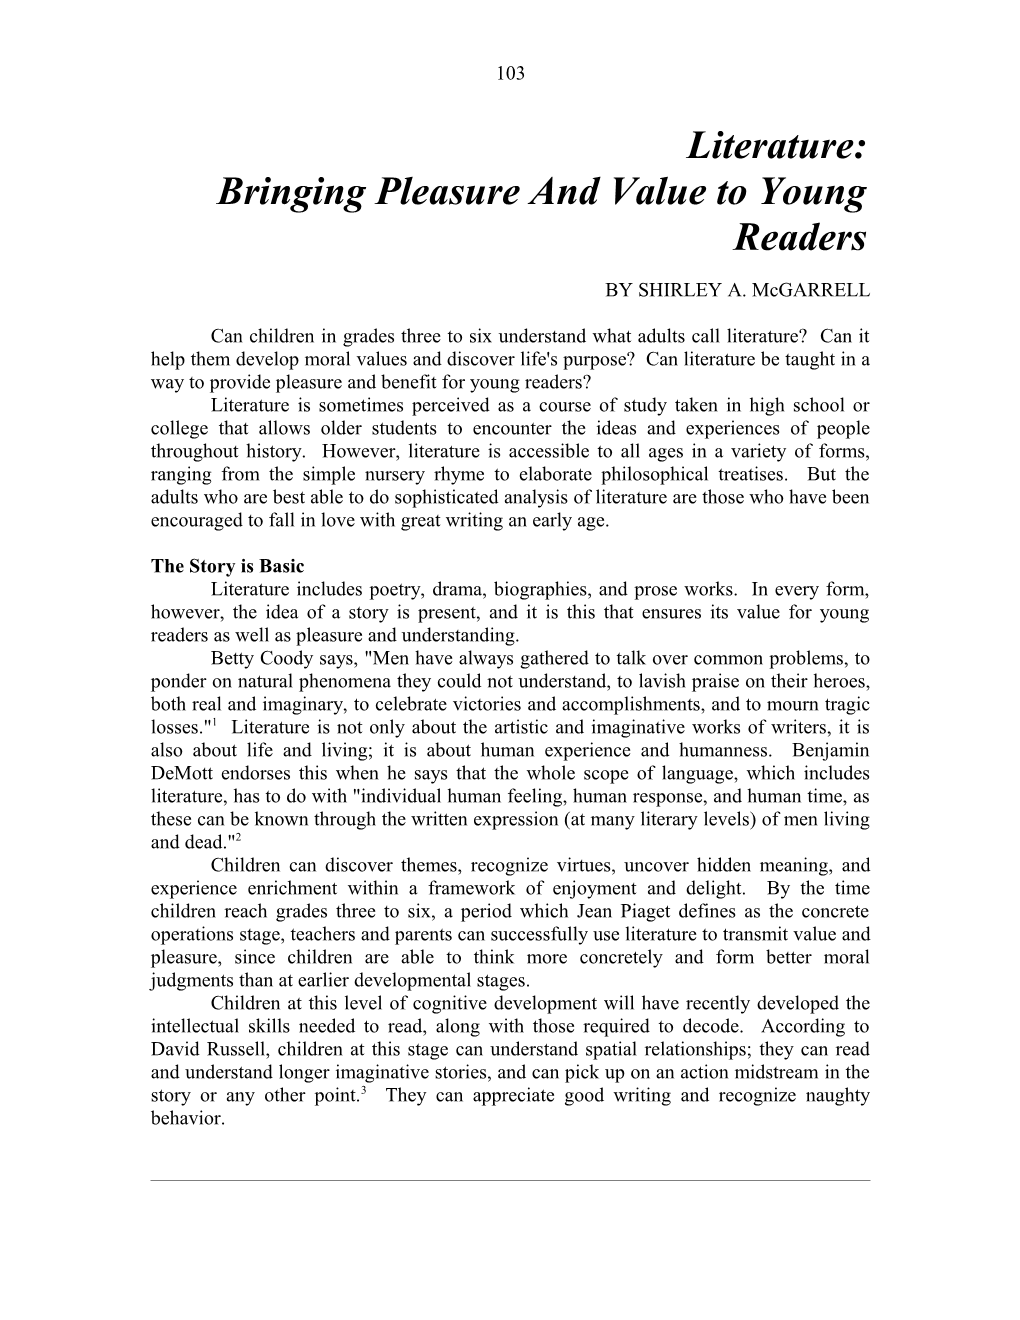 Literature: Bringing Pleasure and Value to Young Readers